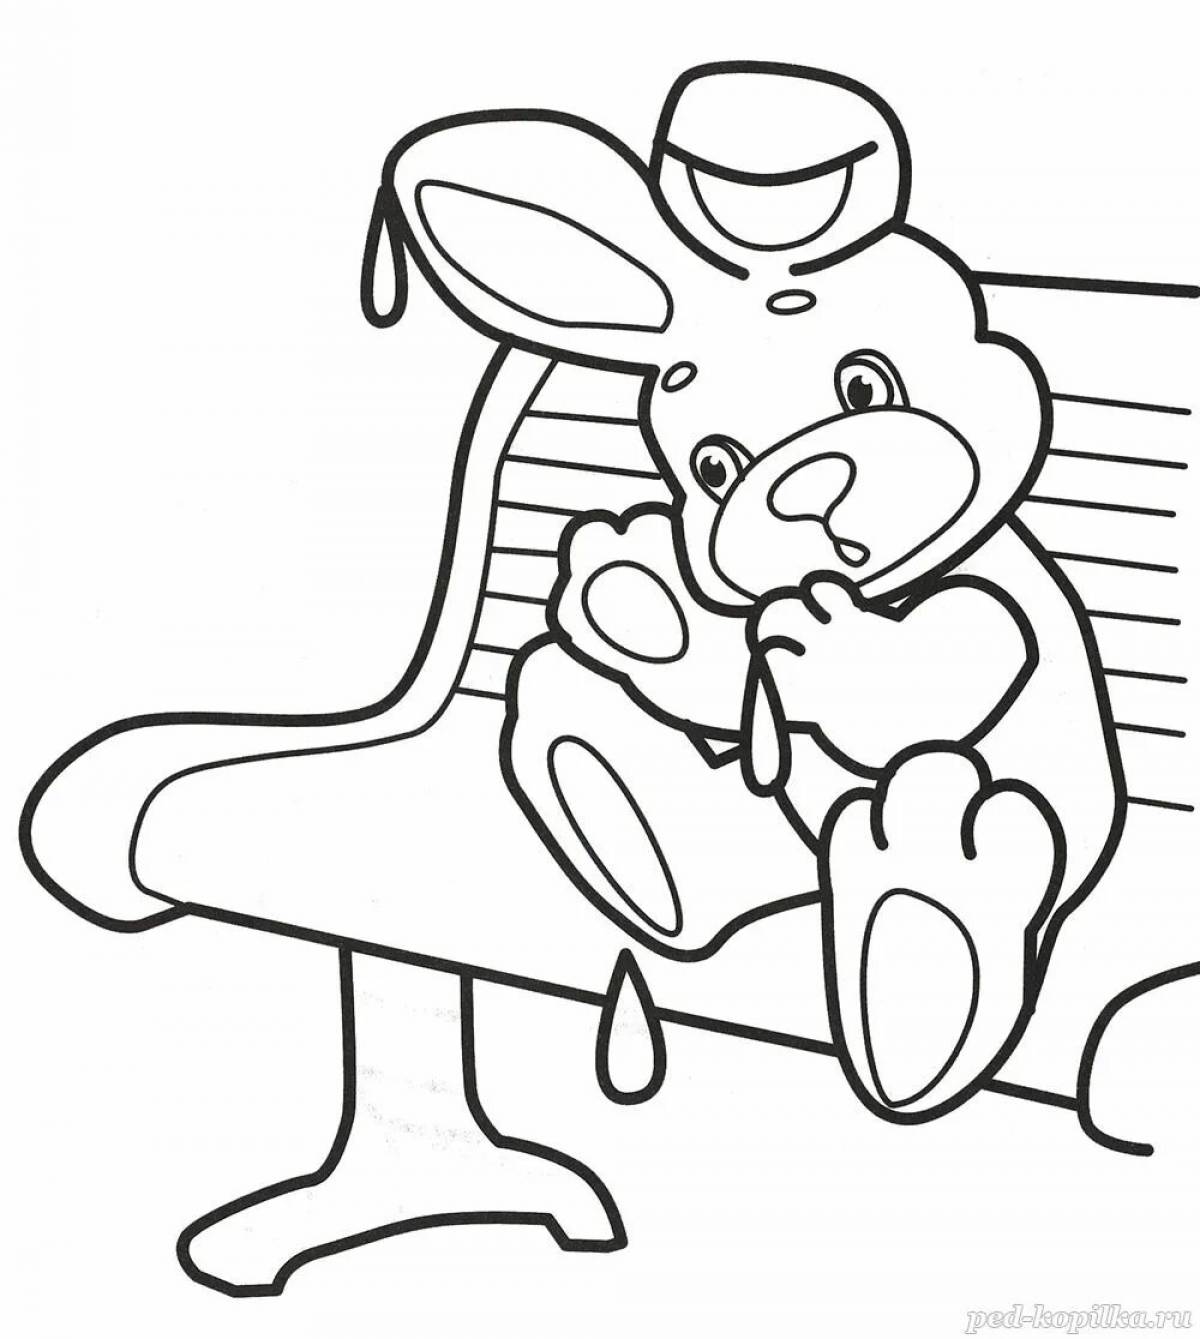 Bunny on bench #11